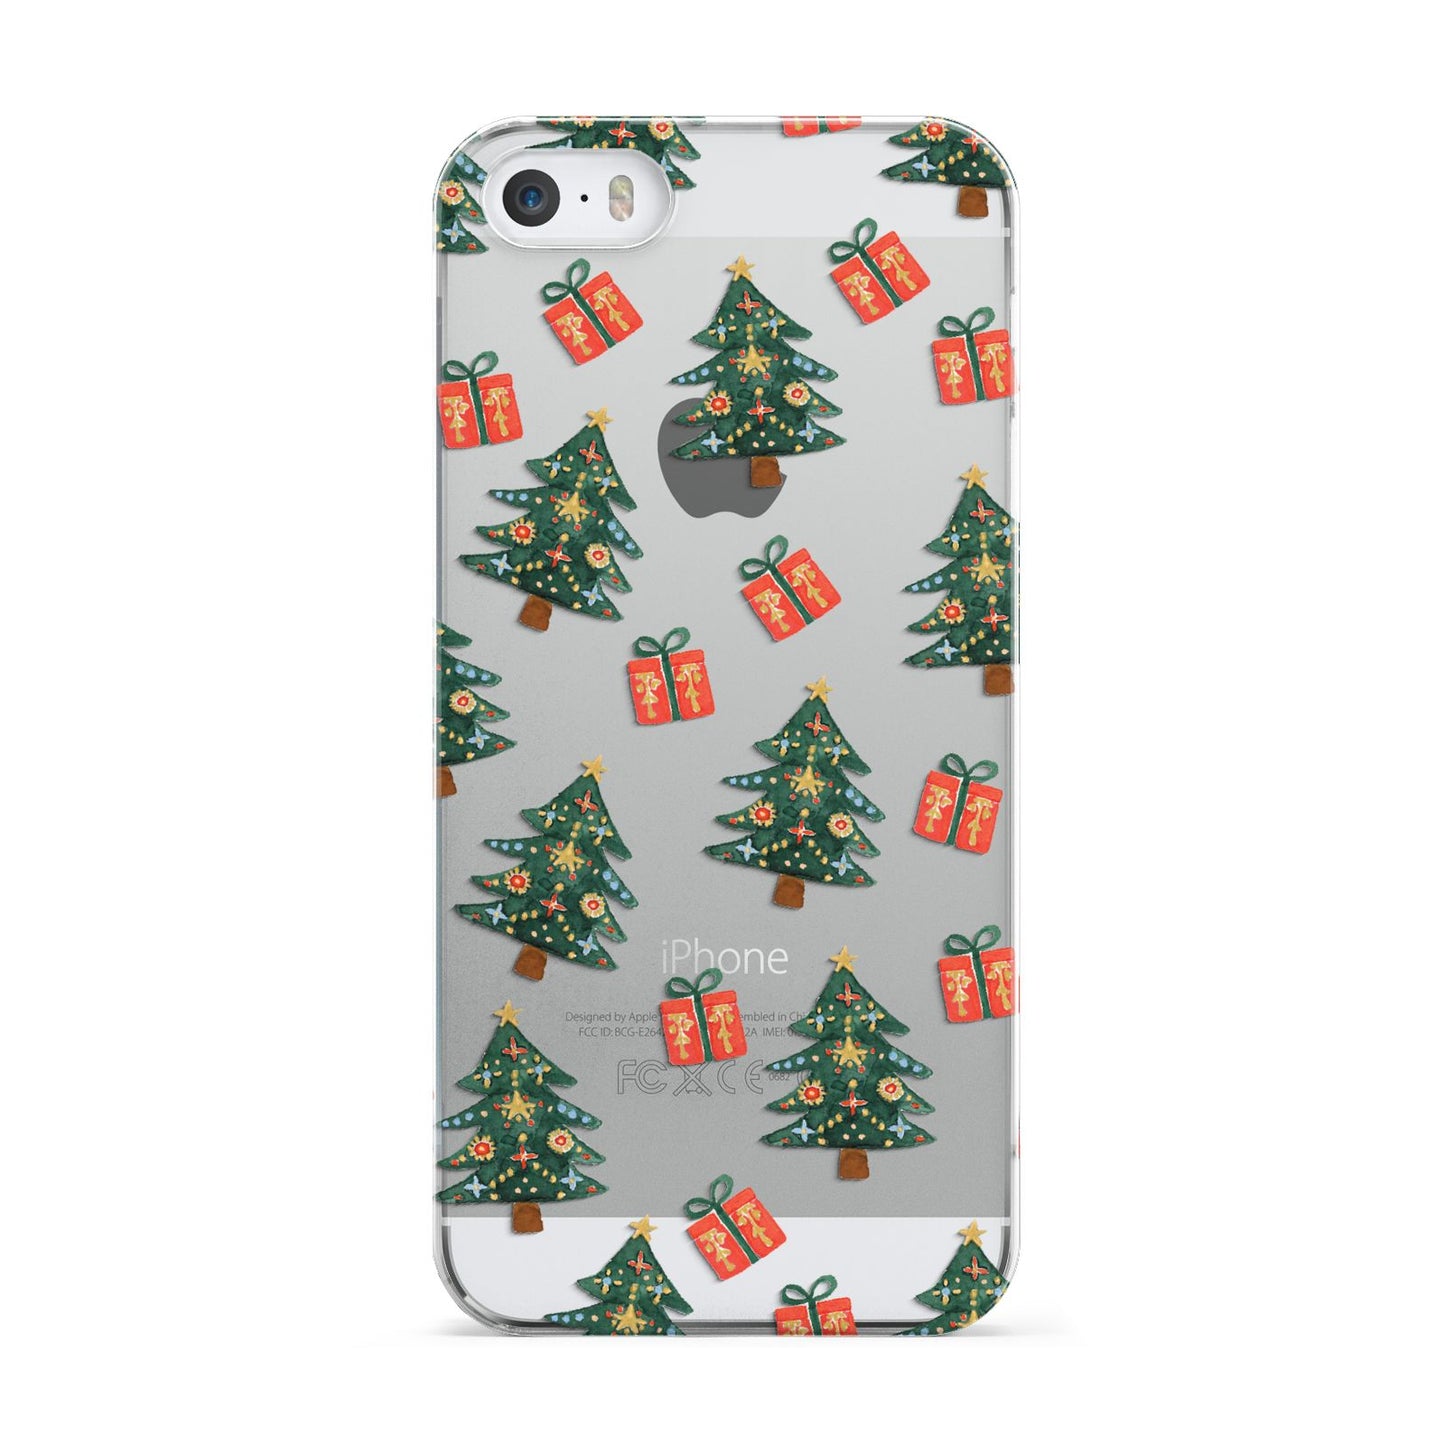 Christmas tree and presents Apple iPhone 5 Case